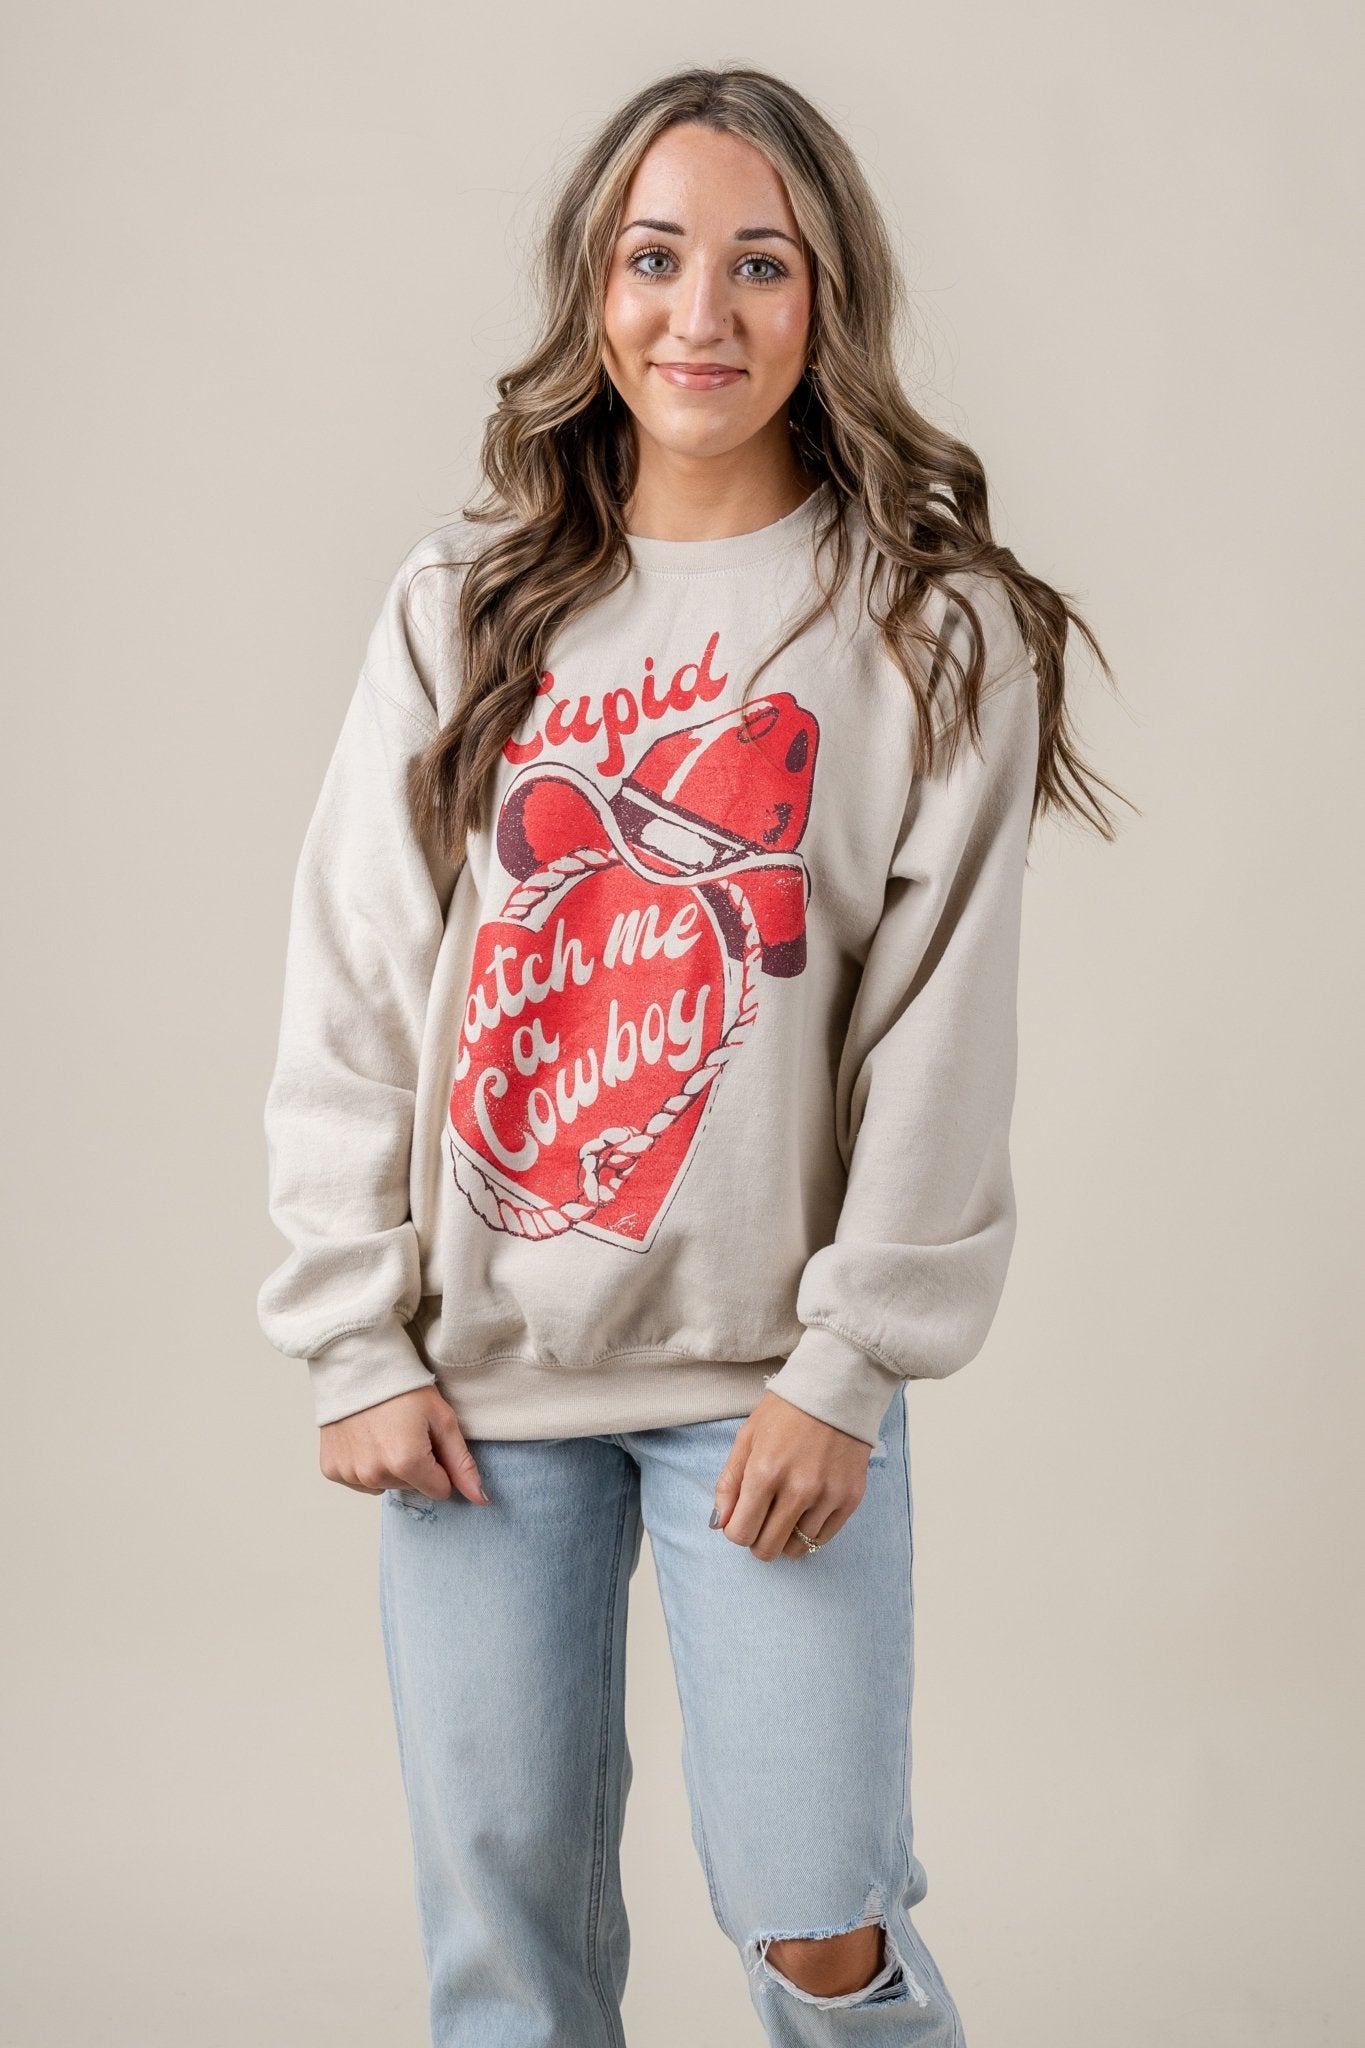 Cupid catch me a cowboy thrifted sweatshirt sand - Trendy Valentine's T-Shirts at Lush Fashion Lounge Boutique in Oklahoma City